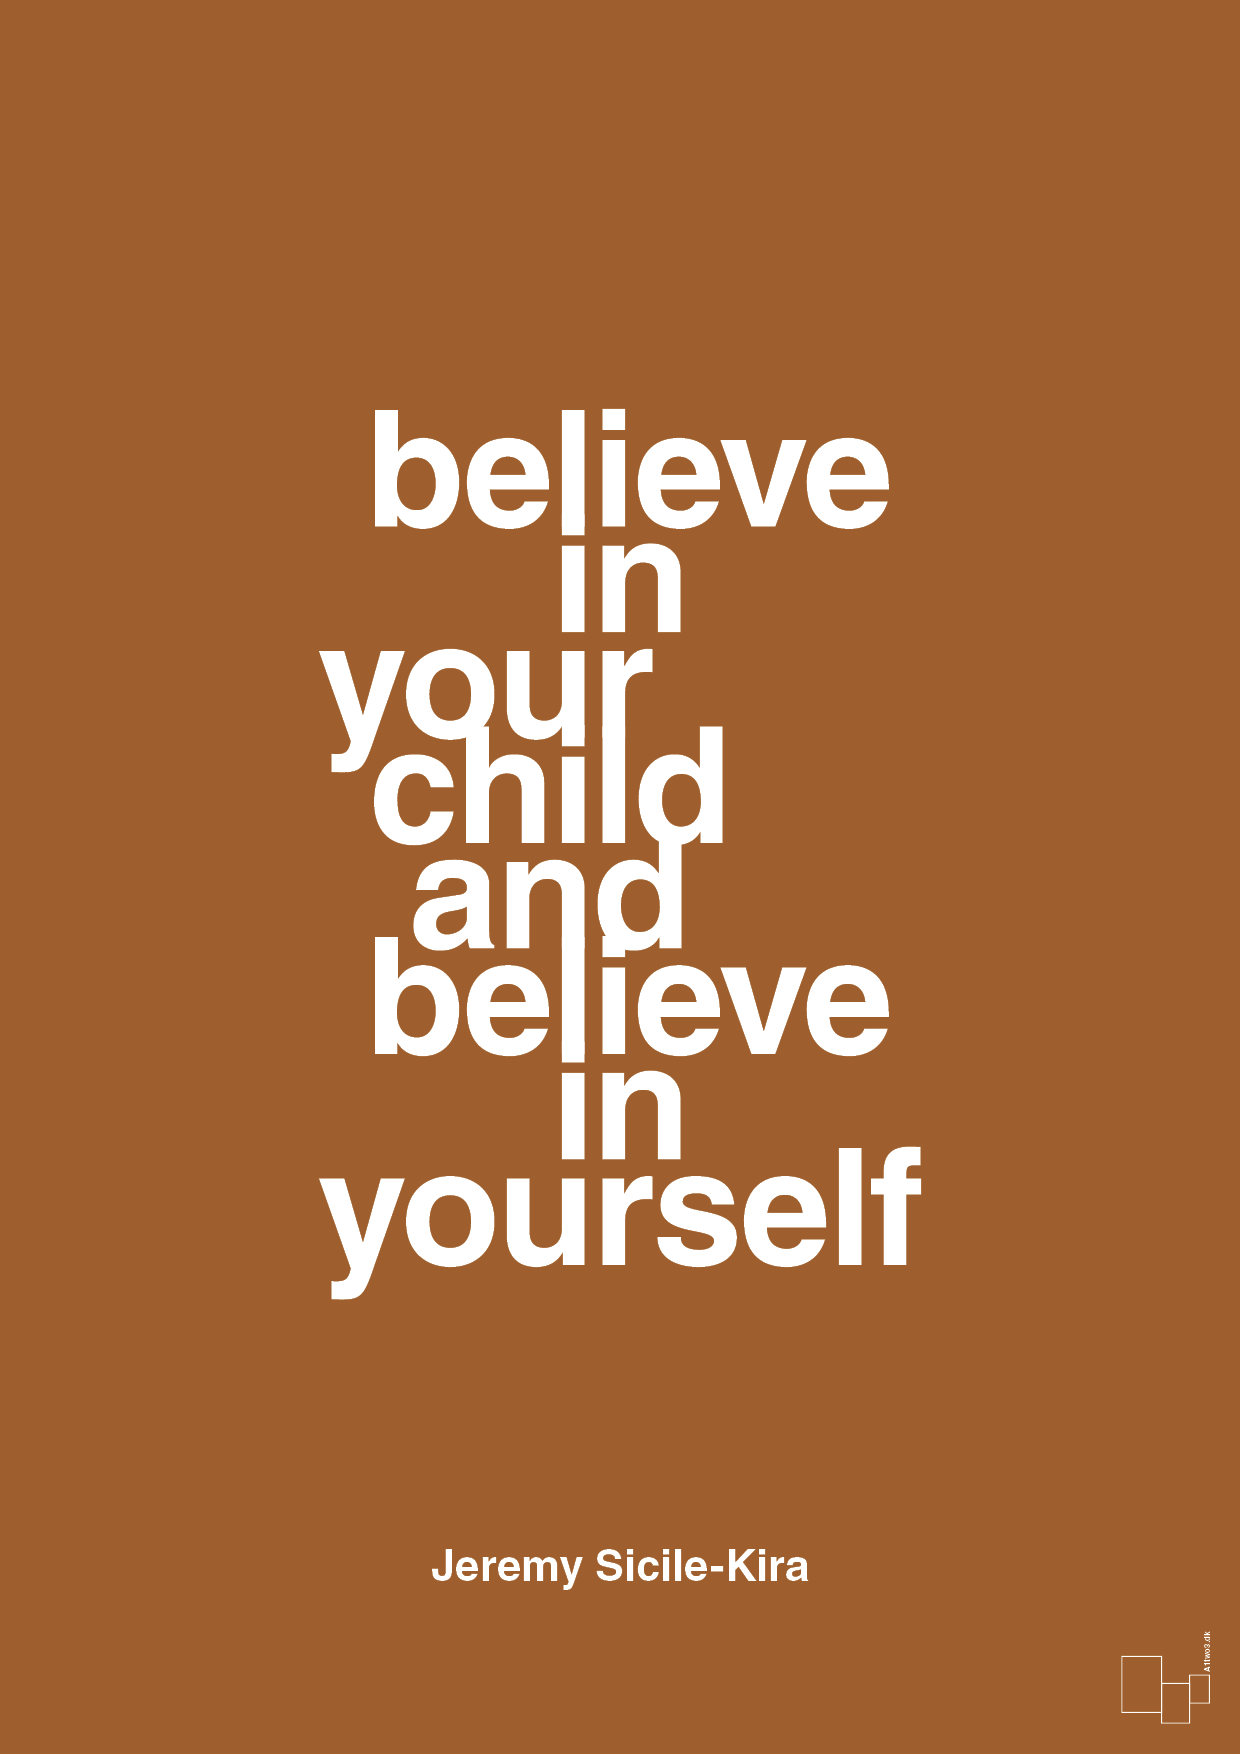 believe in your child and believe in yourself - Plakat med Samfund i Cognac